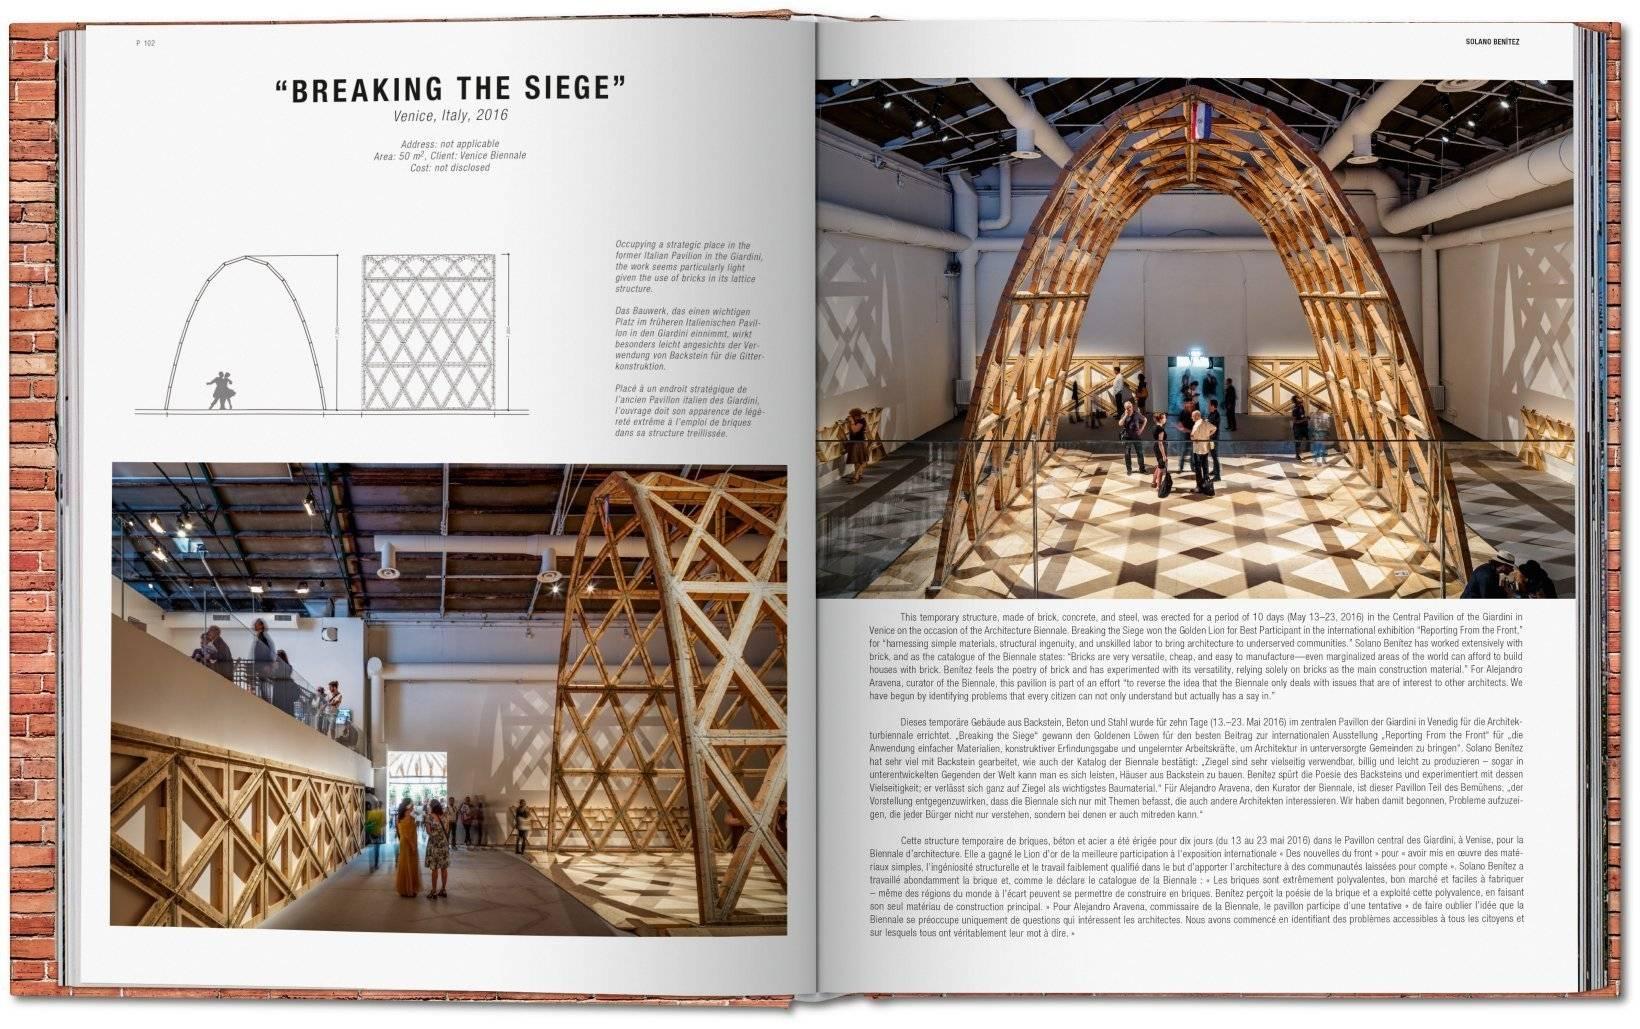 Shigeru Ban: The Paper Architect's Complete Work 1985-2010 — Plant